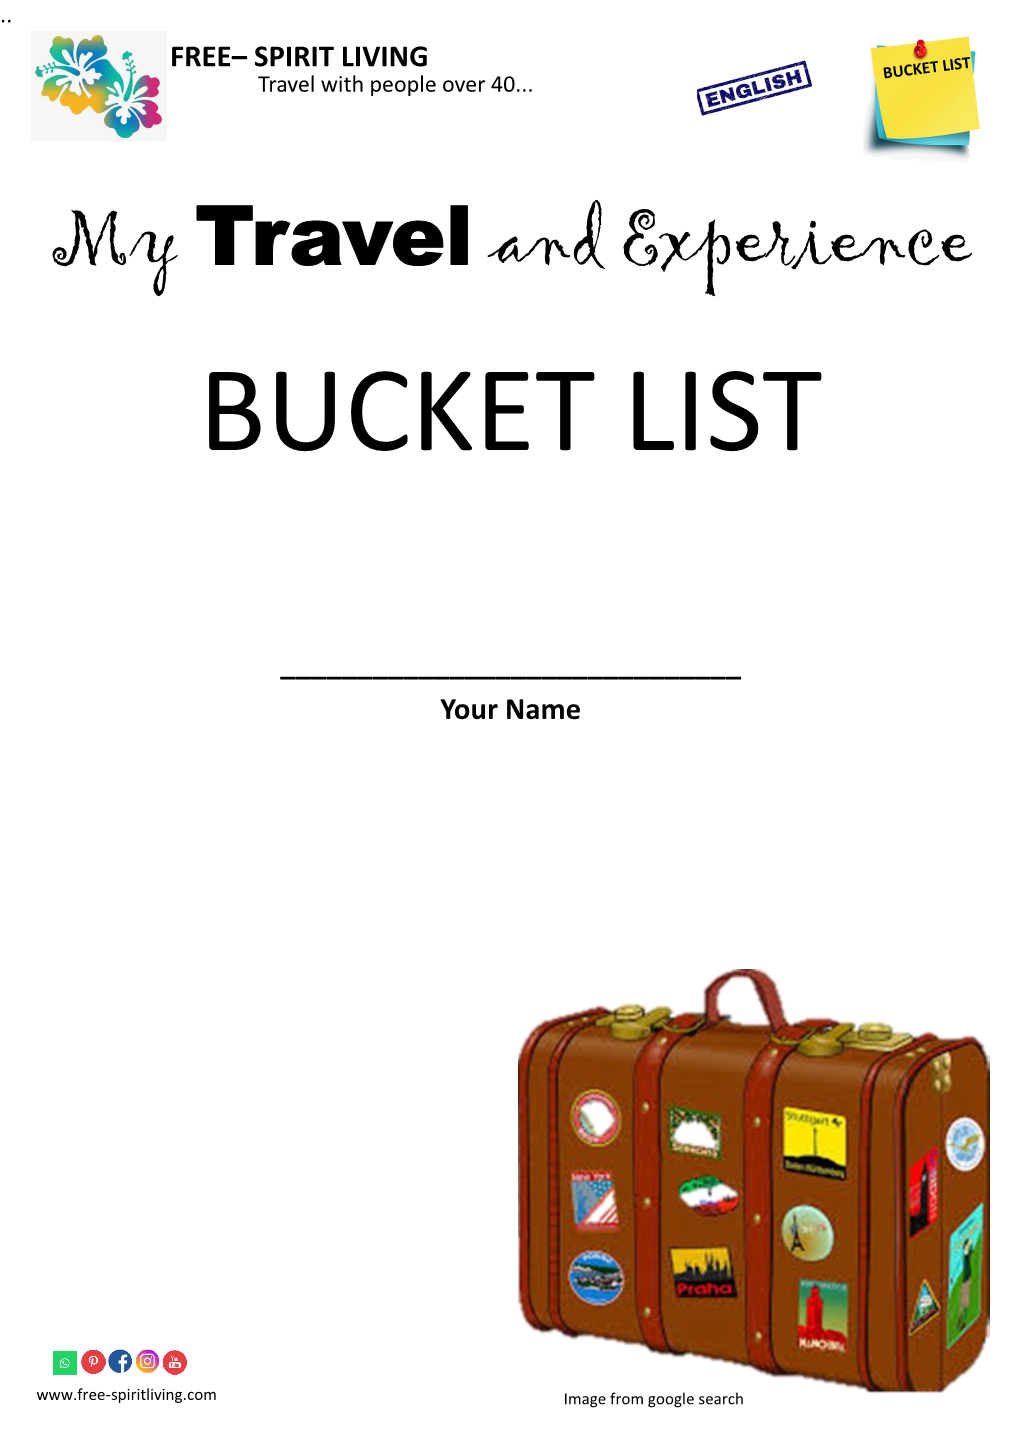 My Travel and Experience BUCKET LIST